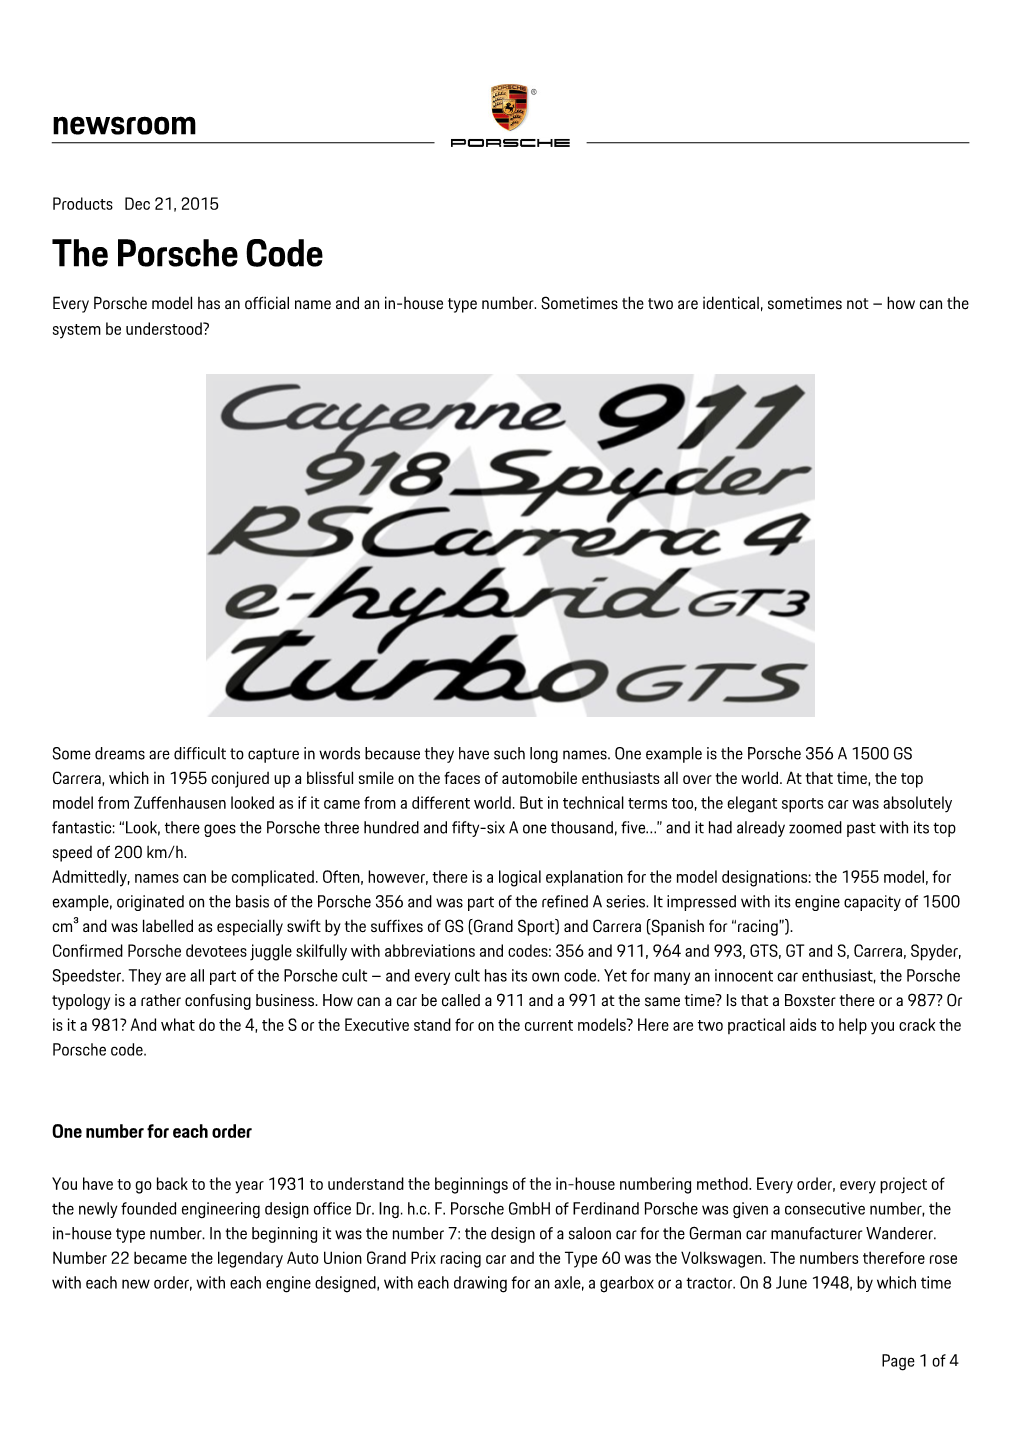 The Porsche Code Every Porsche Model Has an Official Name and an In-House Type Number